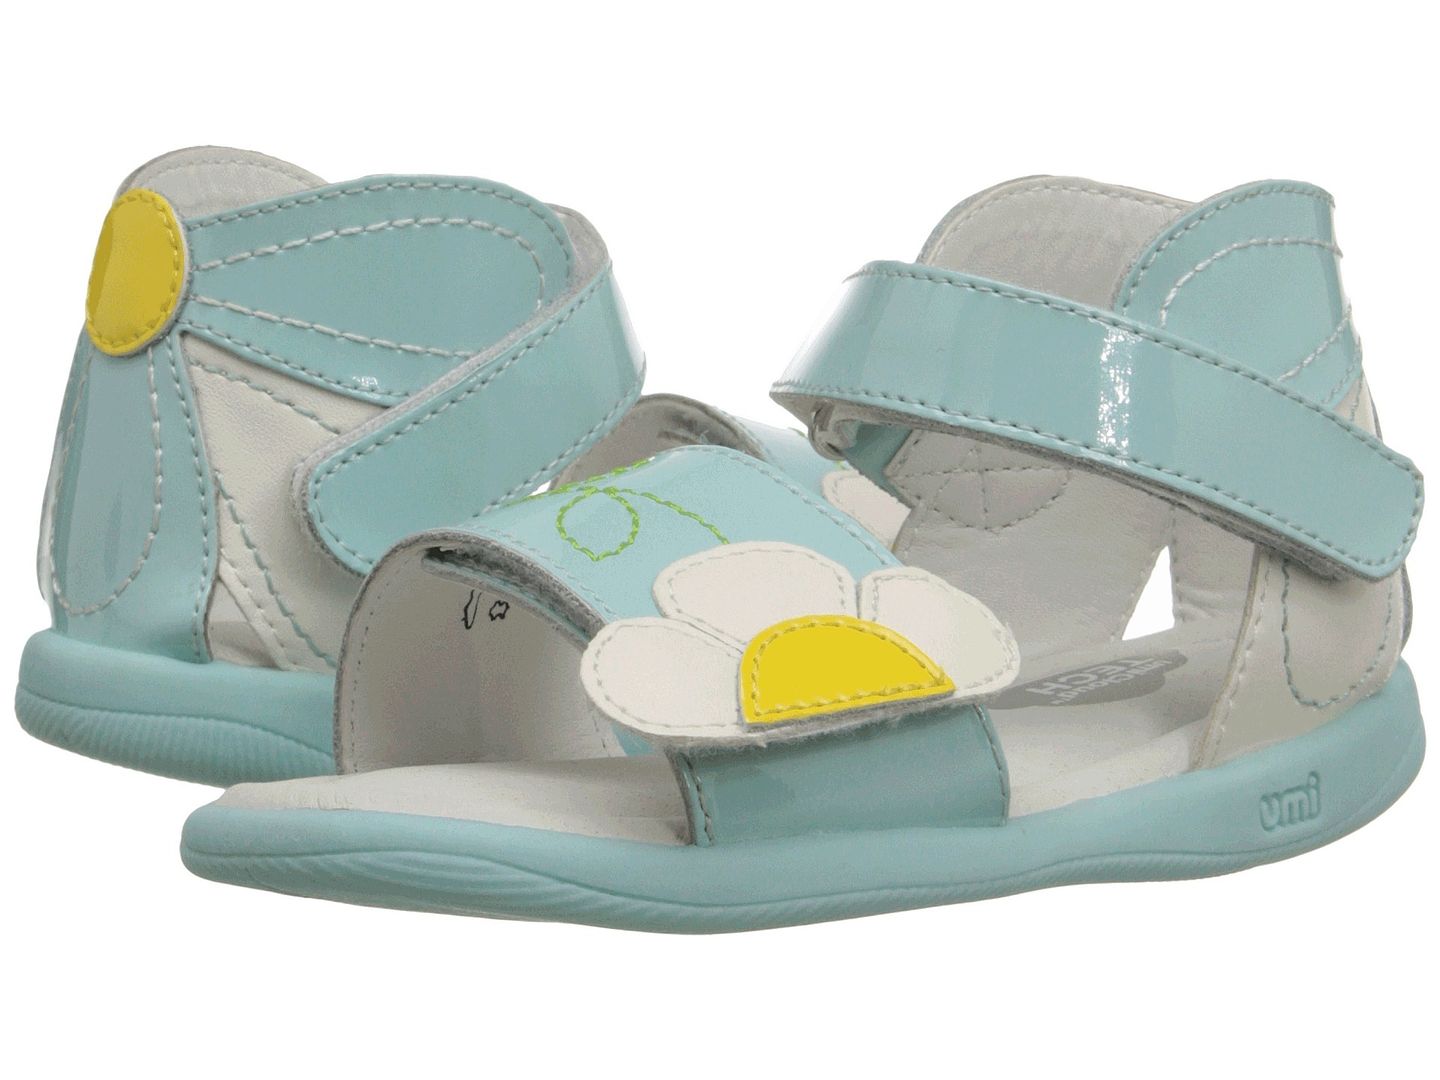 Cute spring shoes for girls: Umi Kids' Adriel Jr. flower sandals for toddlers